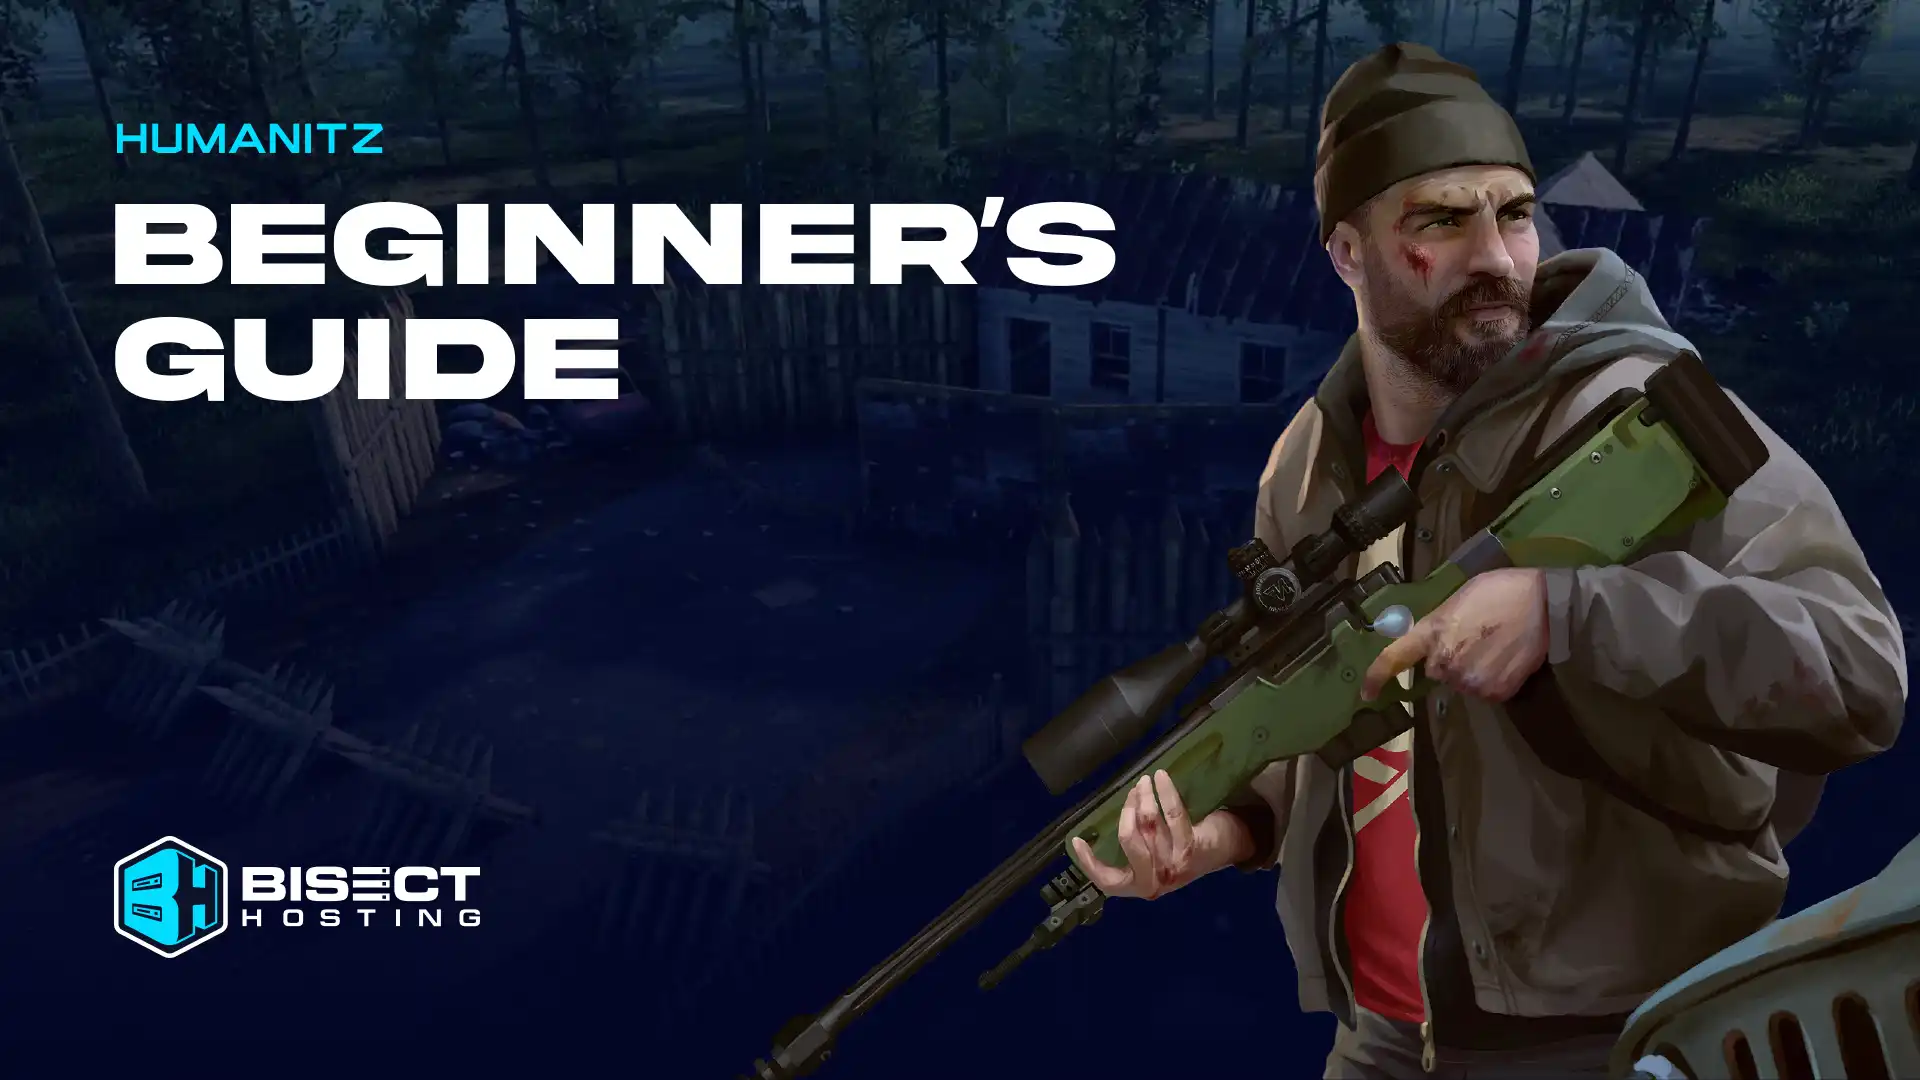 HumanitZ Beginner’s Guide: Starter Tips, Professions, Settings, Spawn Points, & more